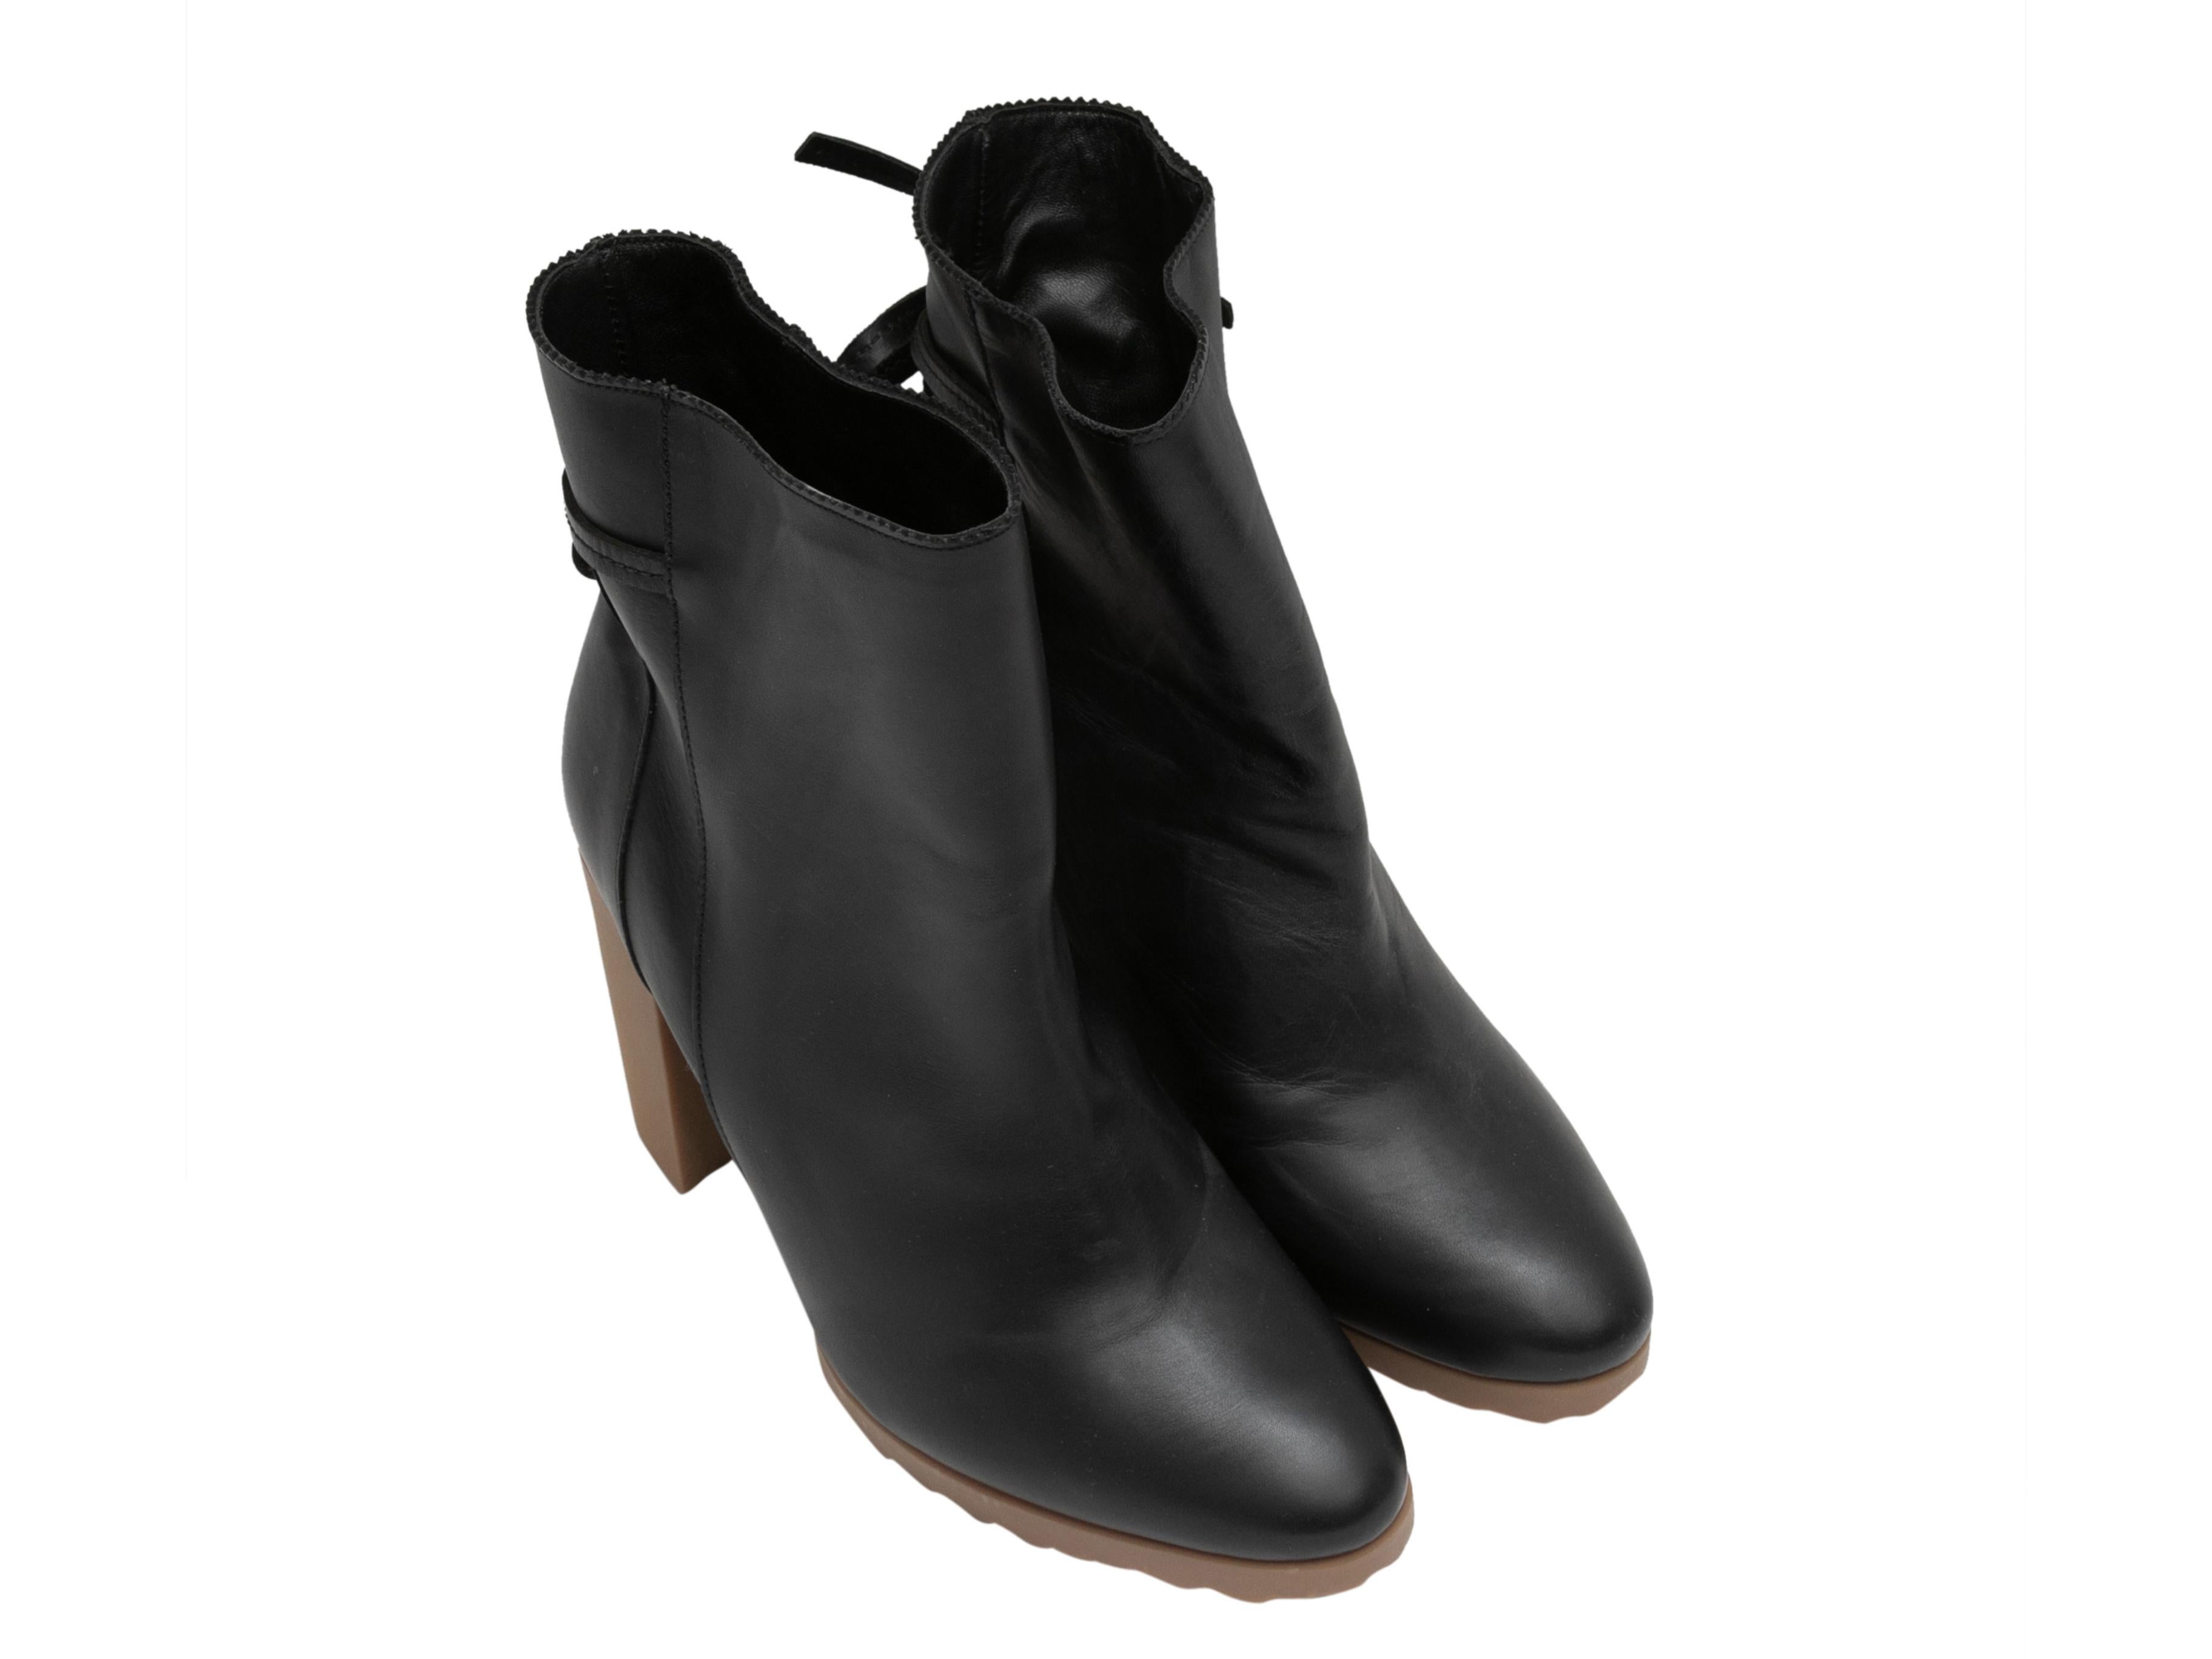 Black Pierre Hardy Leather Ankle Boots Size 41 In Good Condition For Sale In New York, NY